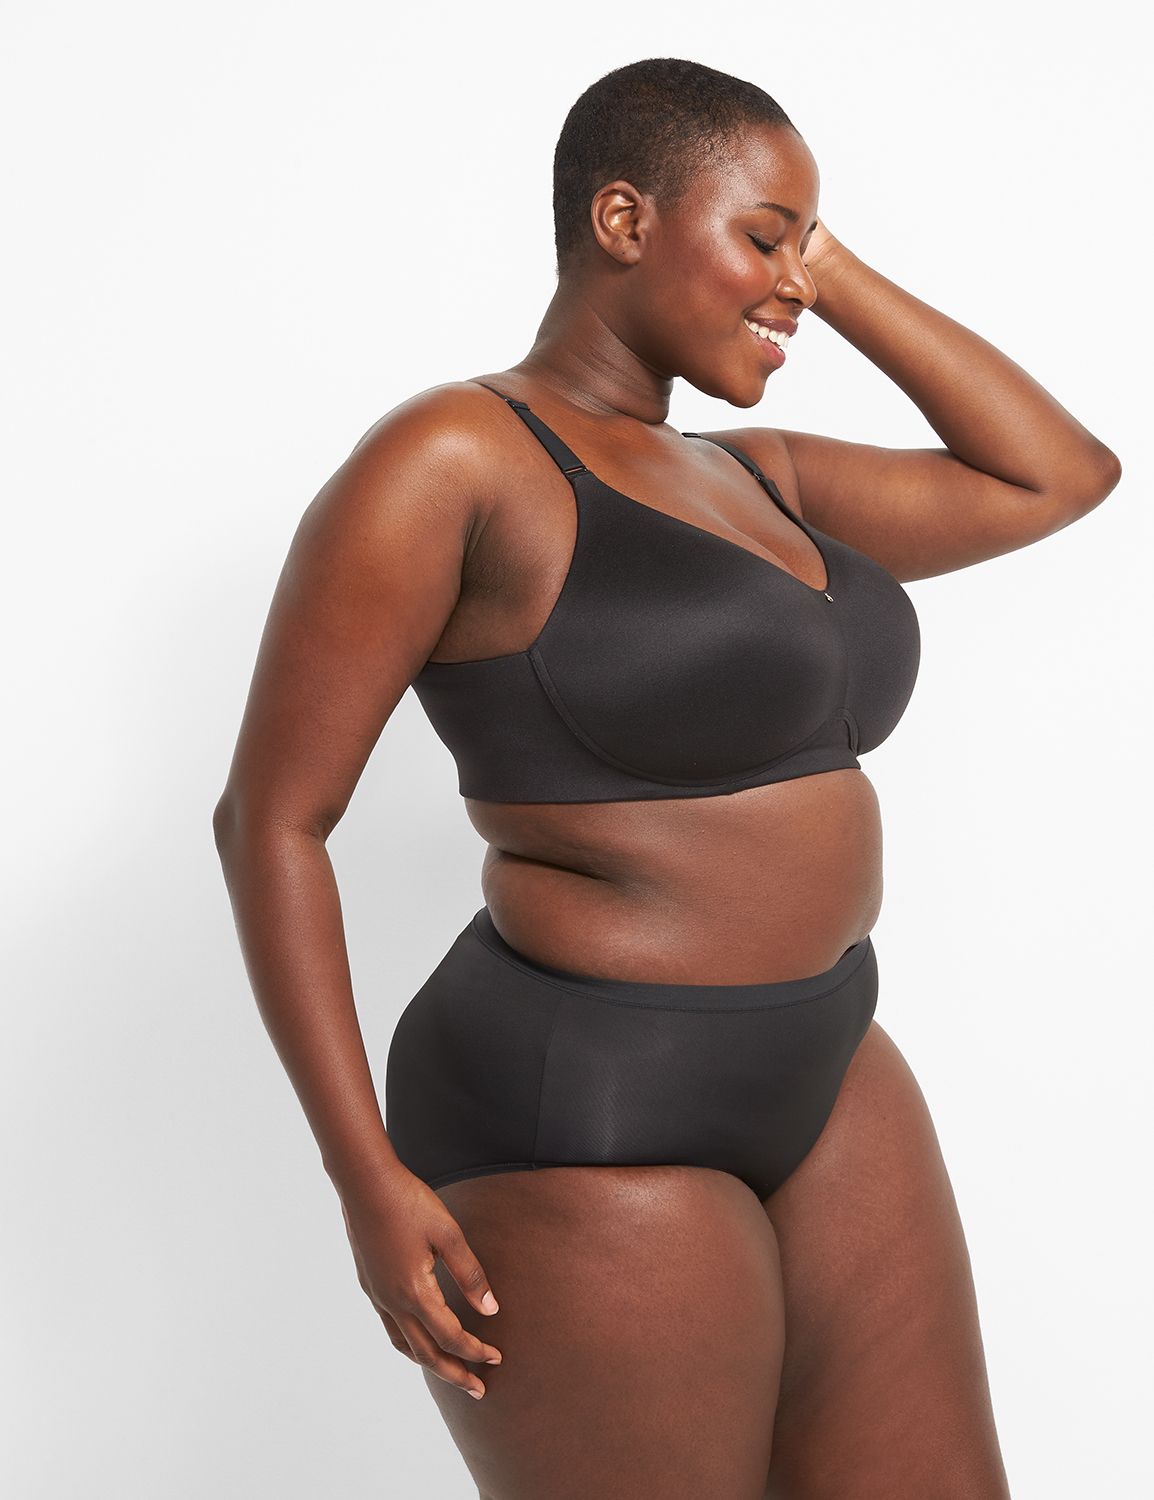 ad @lanebryant Cacique Backsmoother Bra is the key to a confident